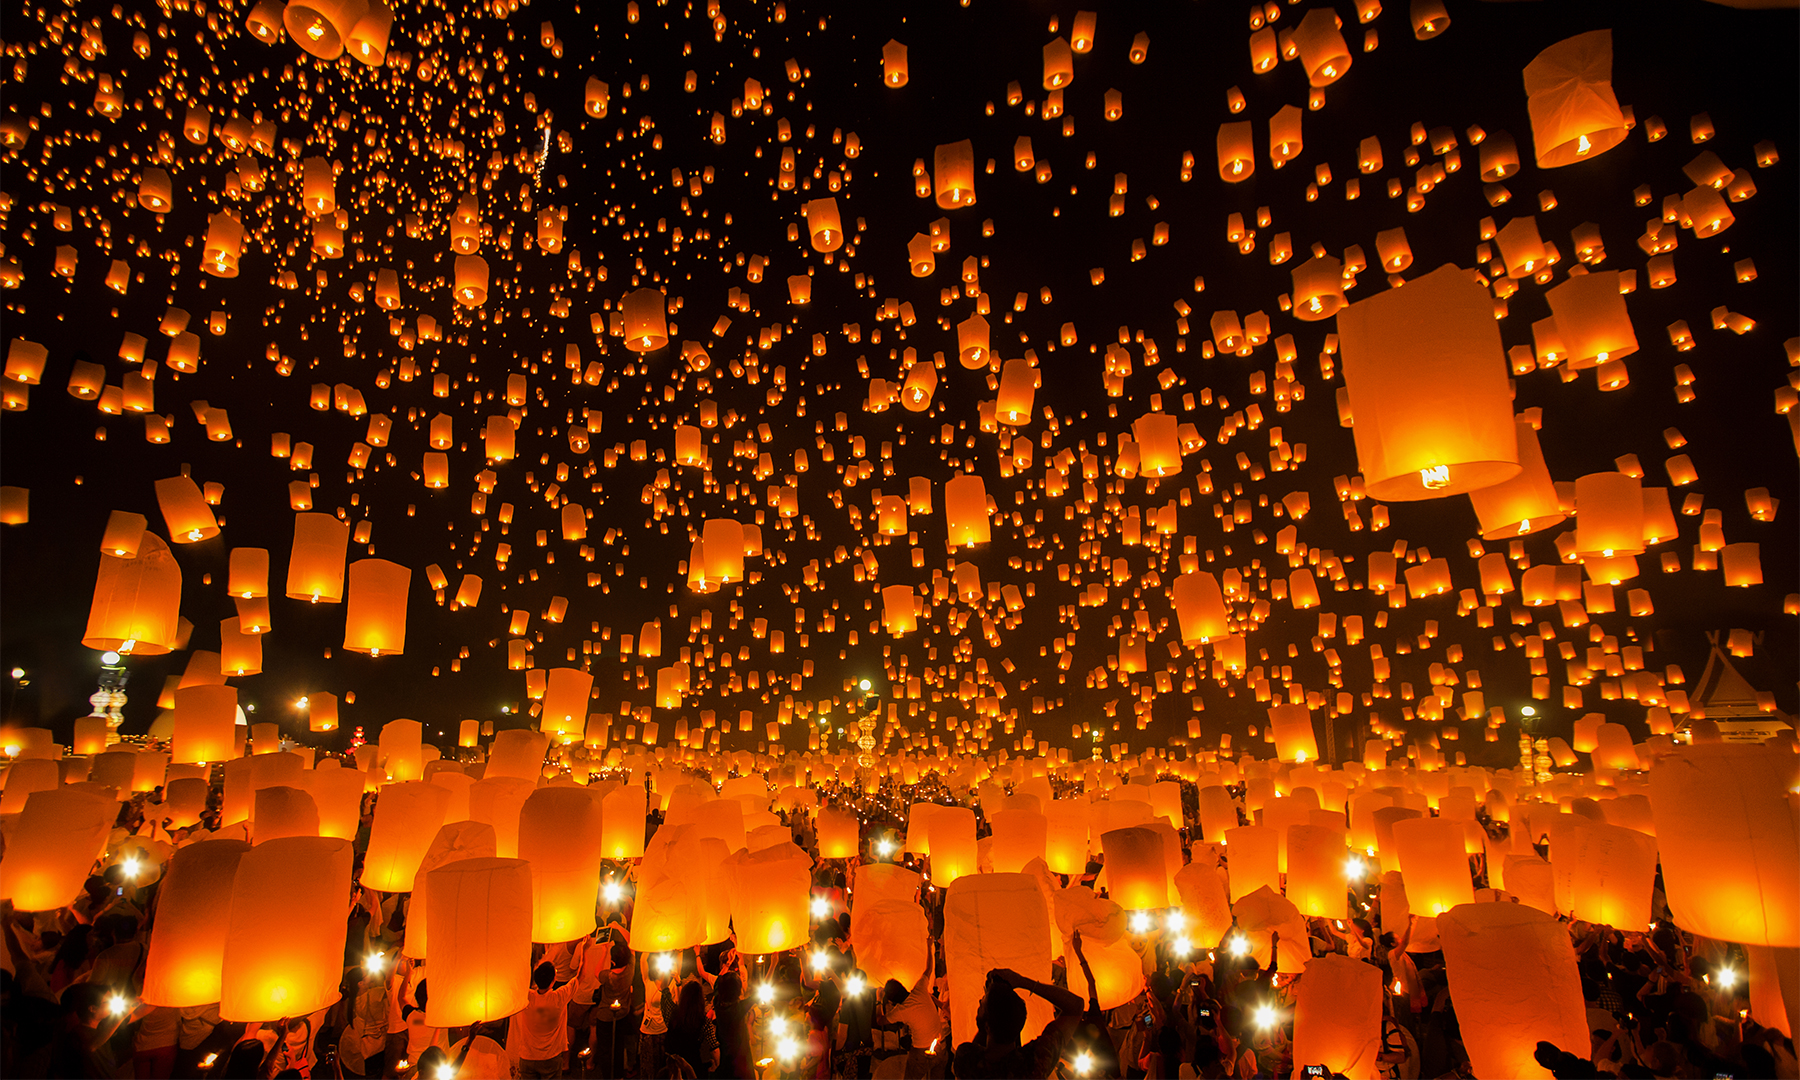 Flying wish lanterns being released against a night sky.